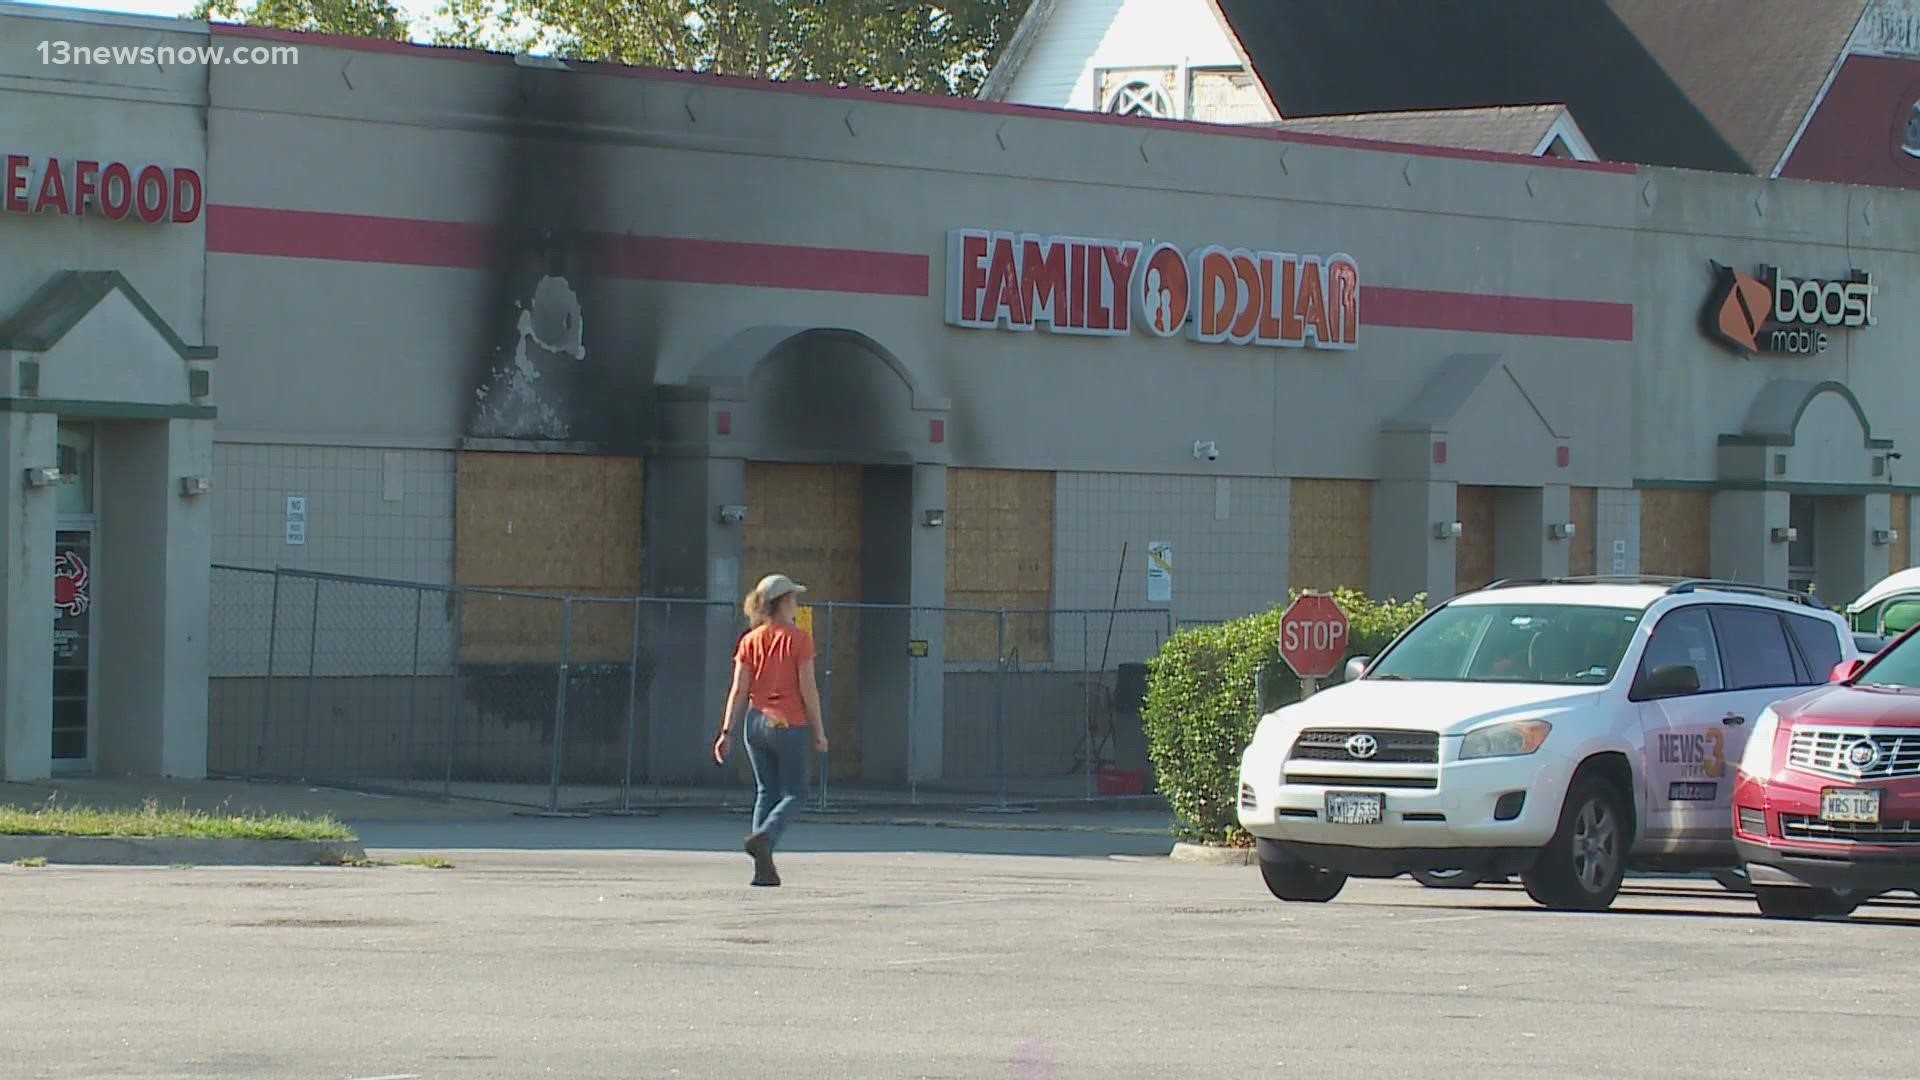 Last week, a fire broke out at the Family Dollar on Church Street, making it even harder for residents to find food close to home.